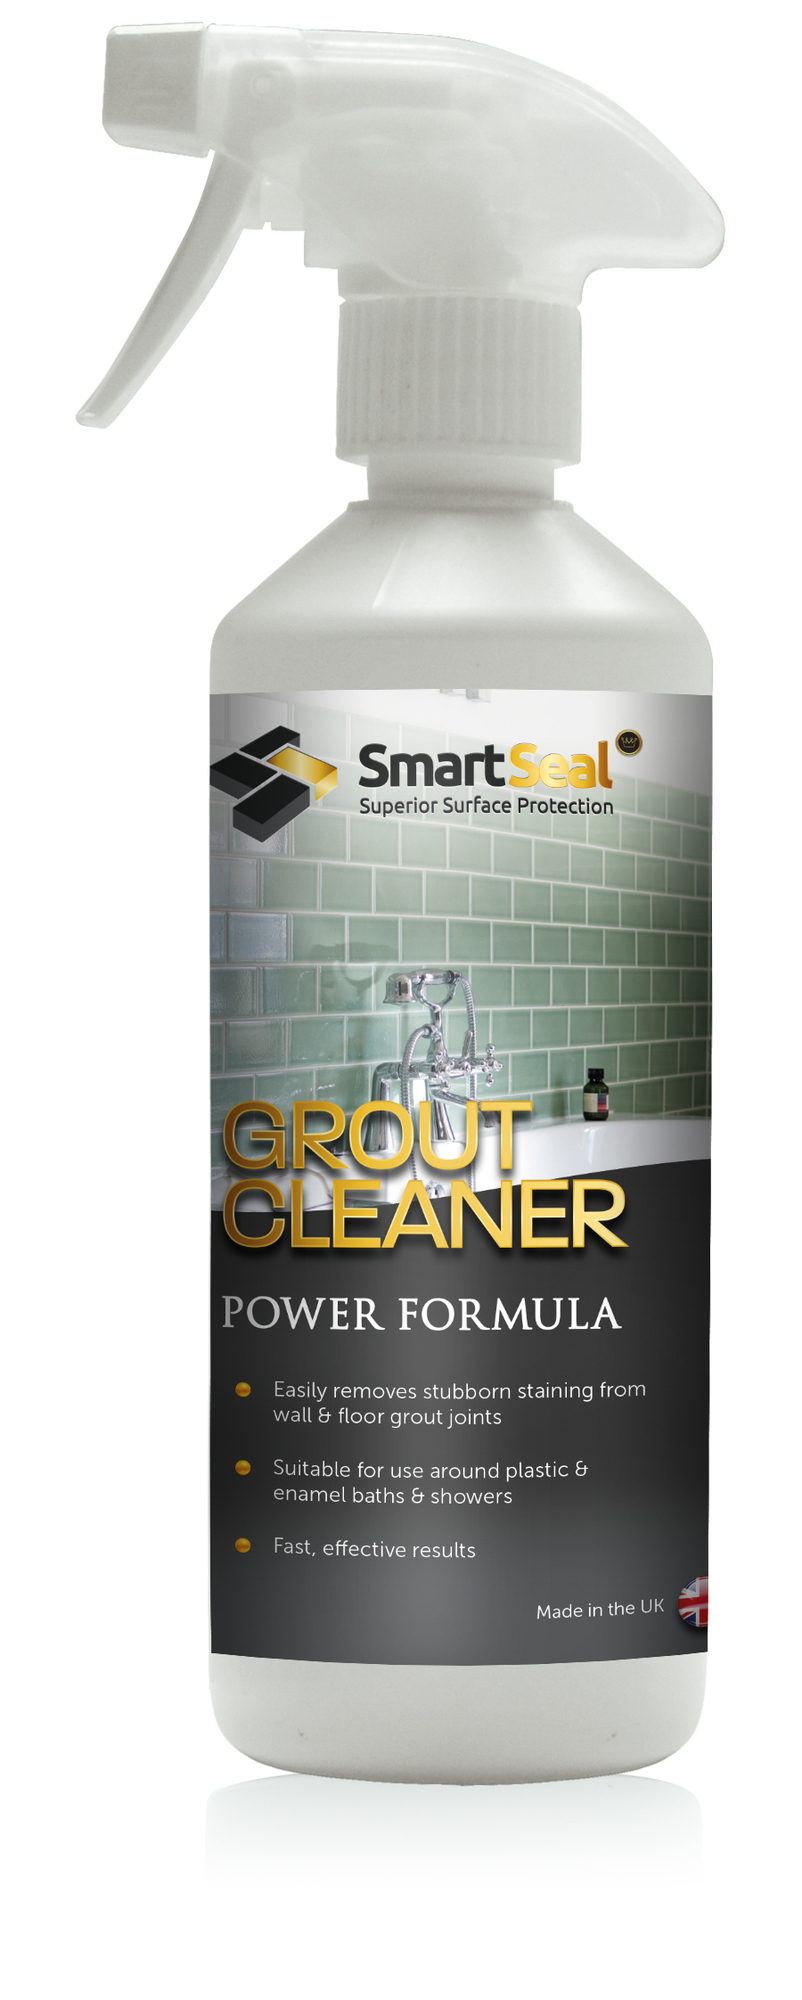 The Ultimate Guide to Cleaning Grout: 10 DIY Tile & Grout Cleaners